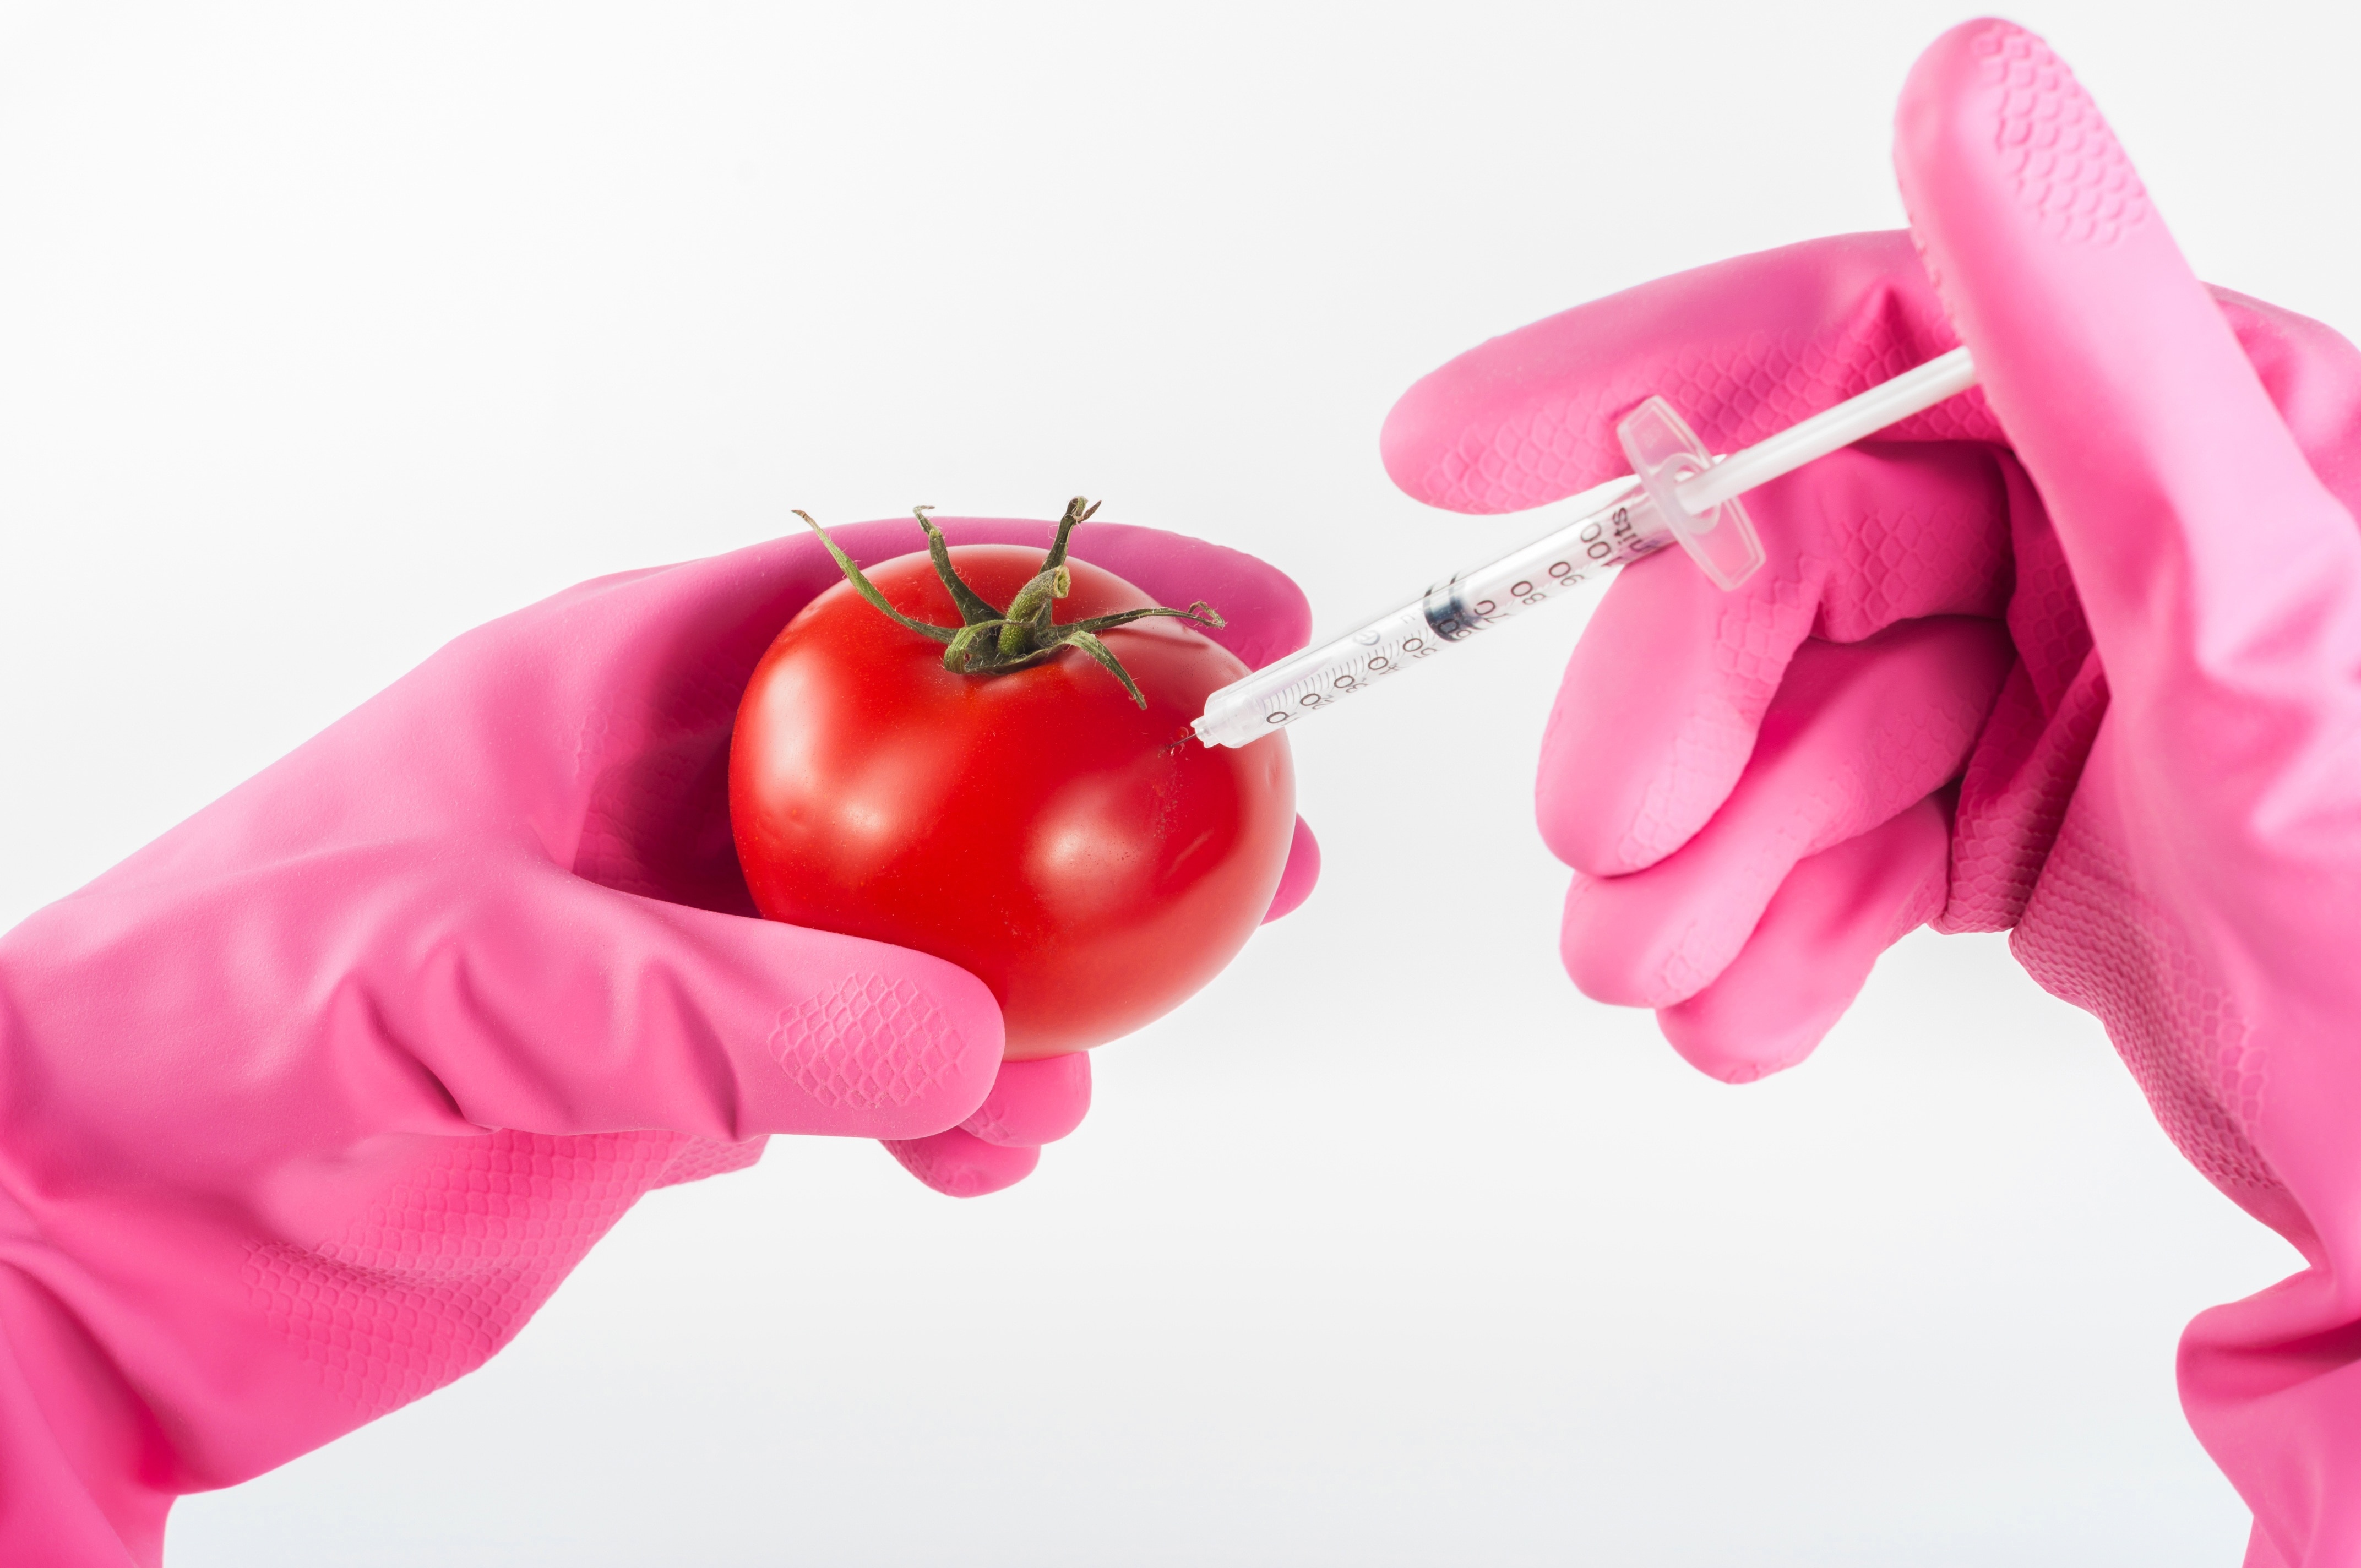 person injecting liquid on red tomato